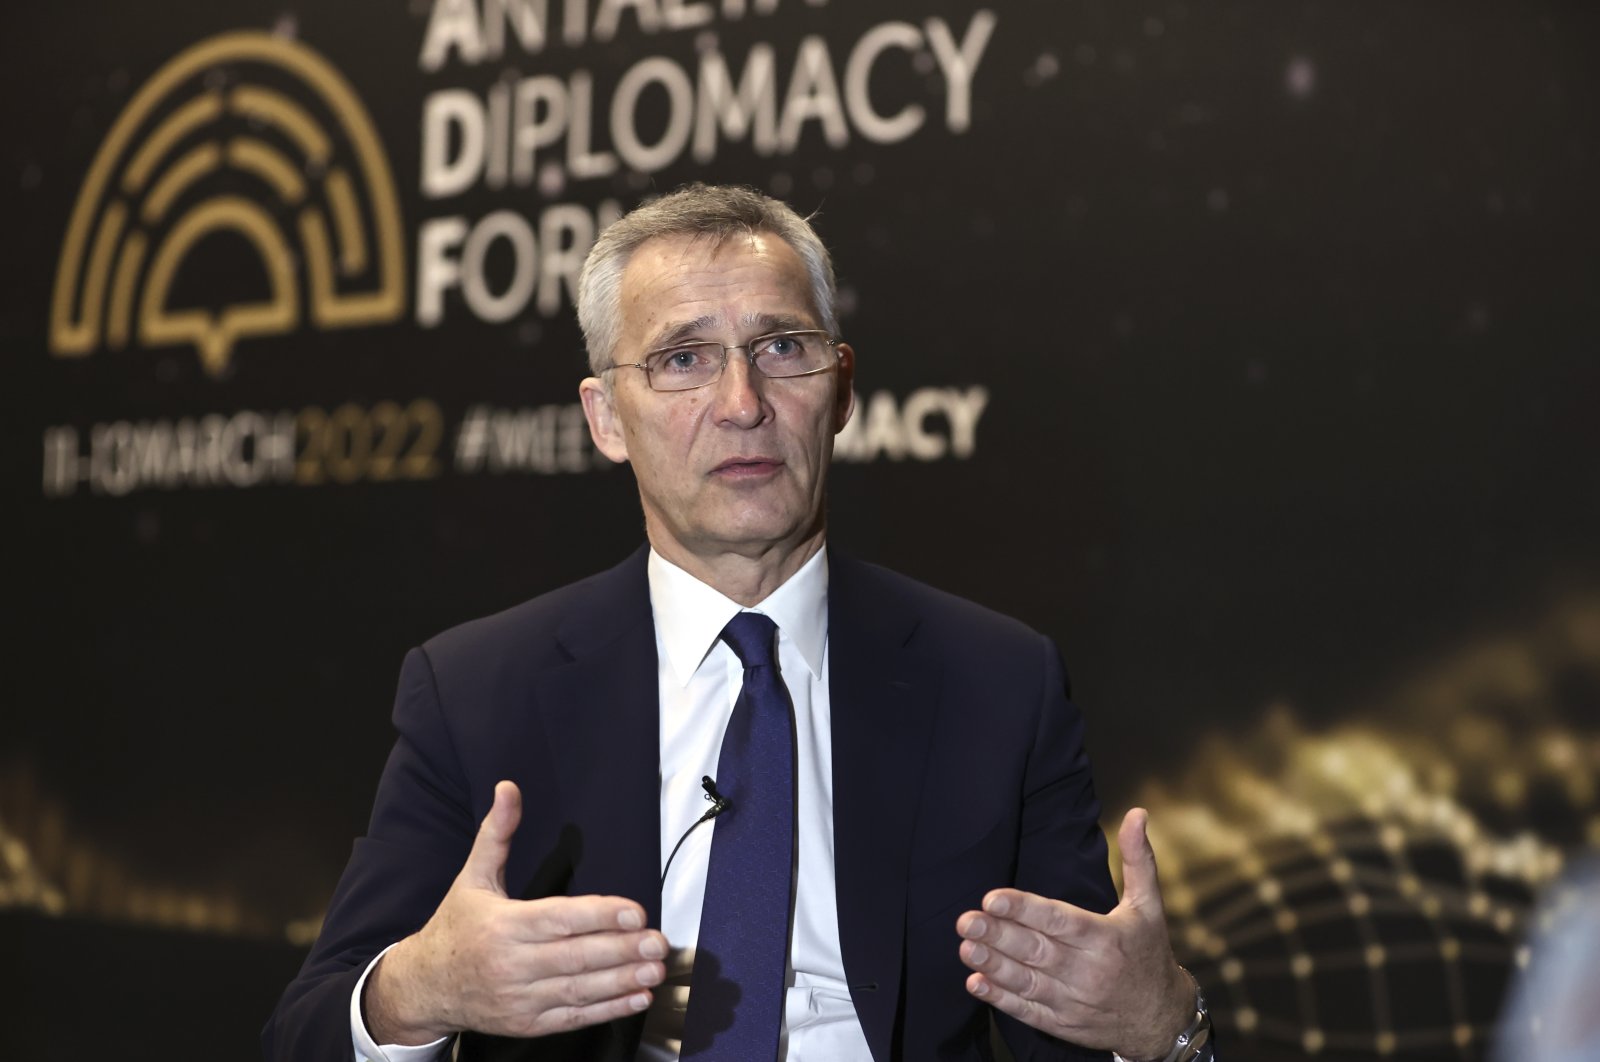 NATO Secretary-General Jens Stoltenberg gives an interview on the sidelines of the Antalya Diplomacy Forum, Antalya, Turkey, March 11, 2022. (AA Photo)